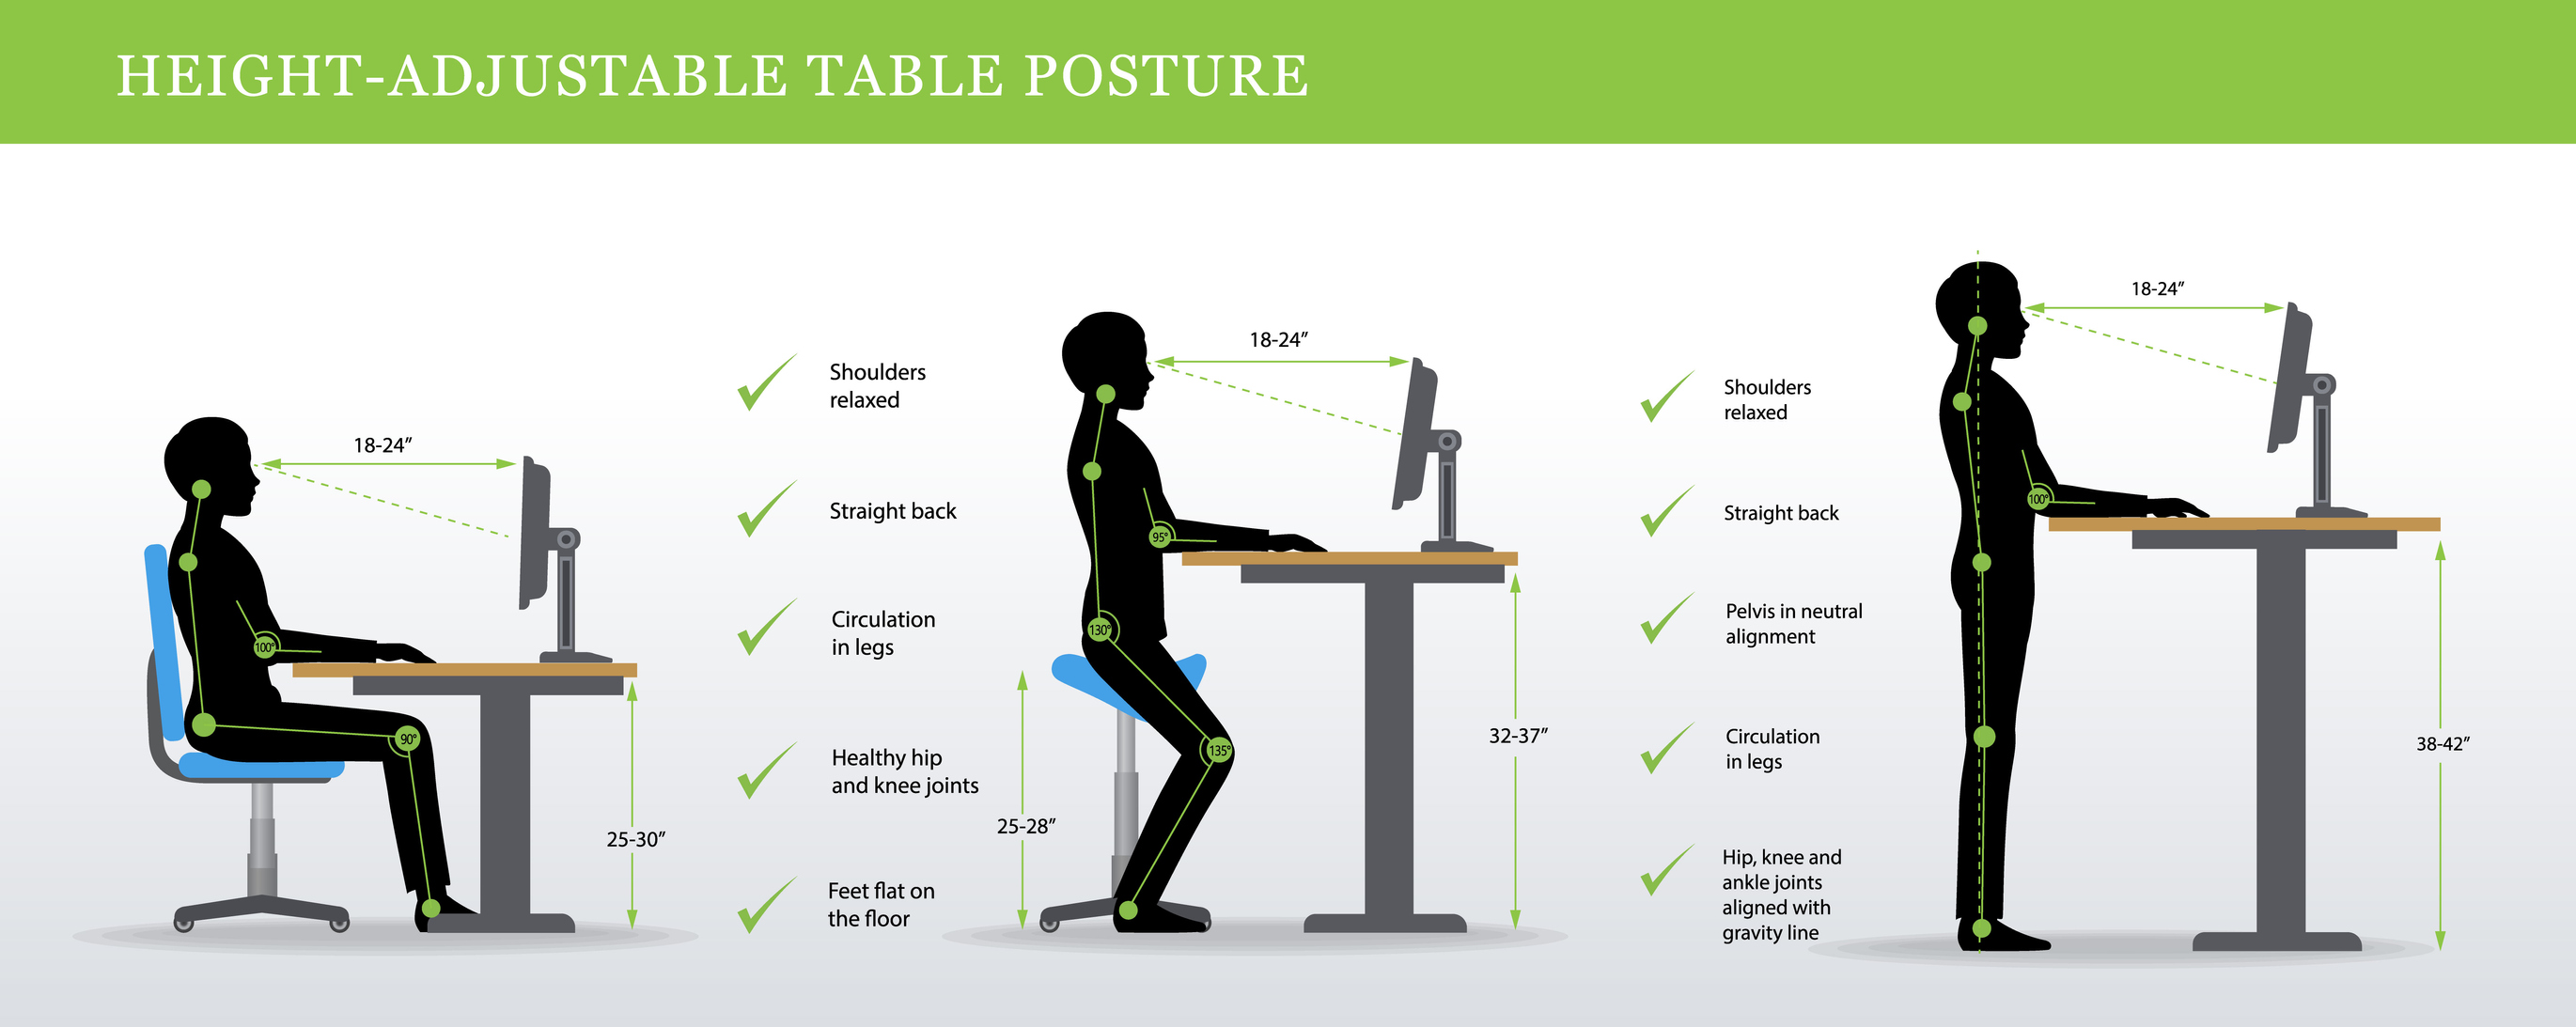 Workplace ergonomics and physical health